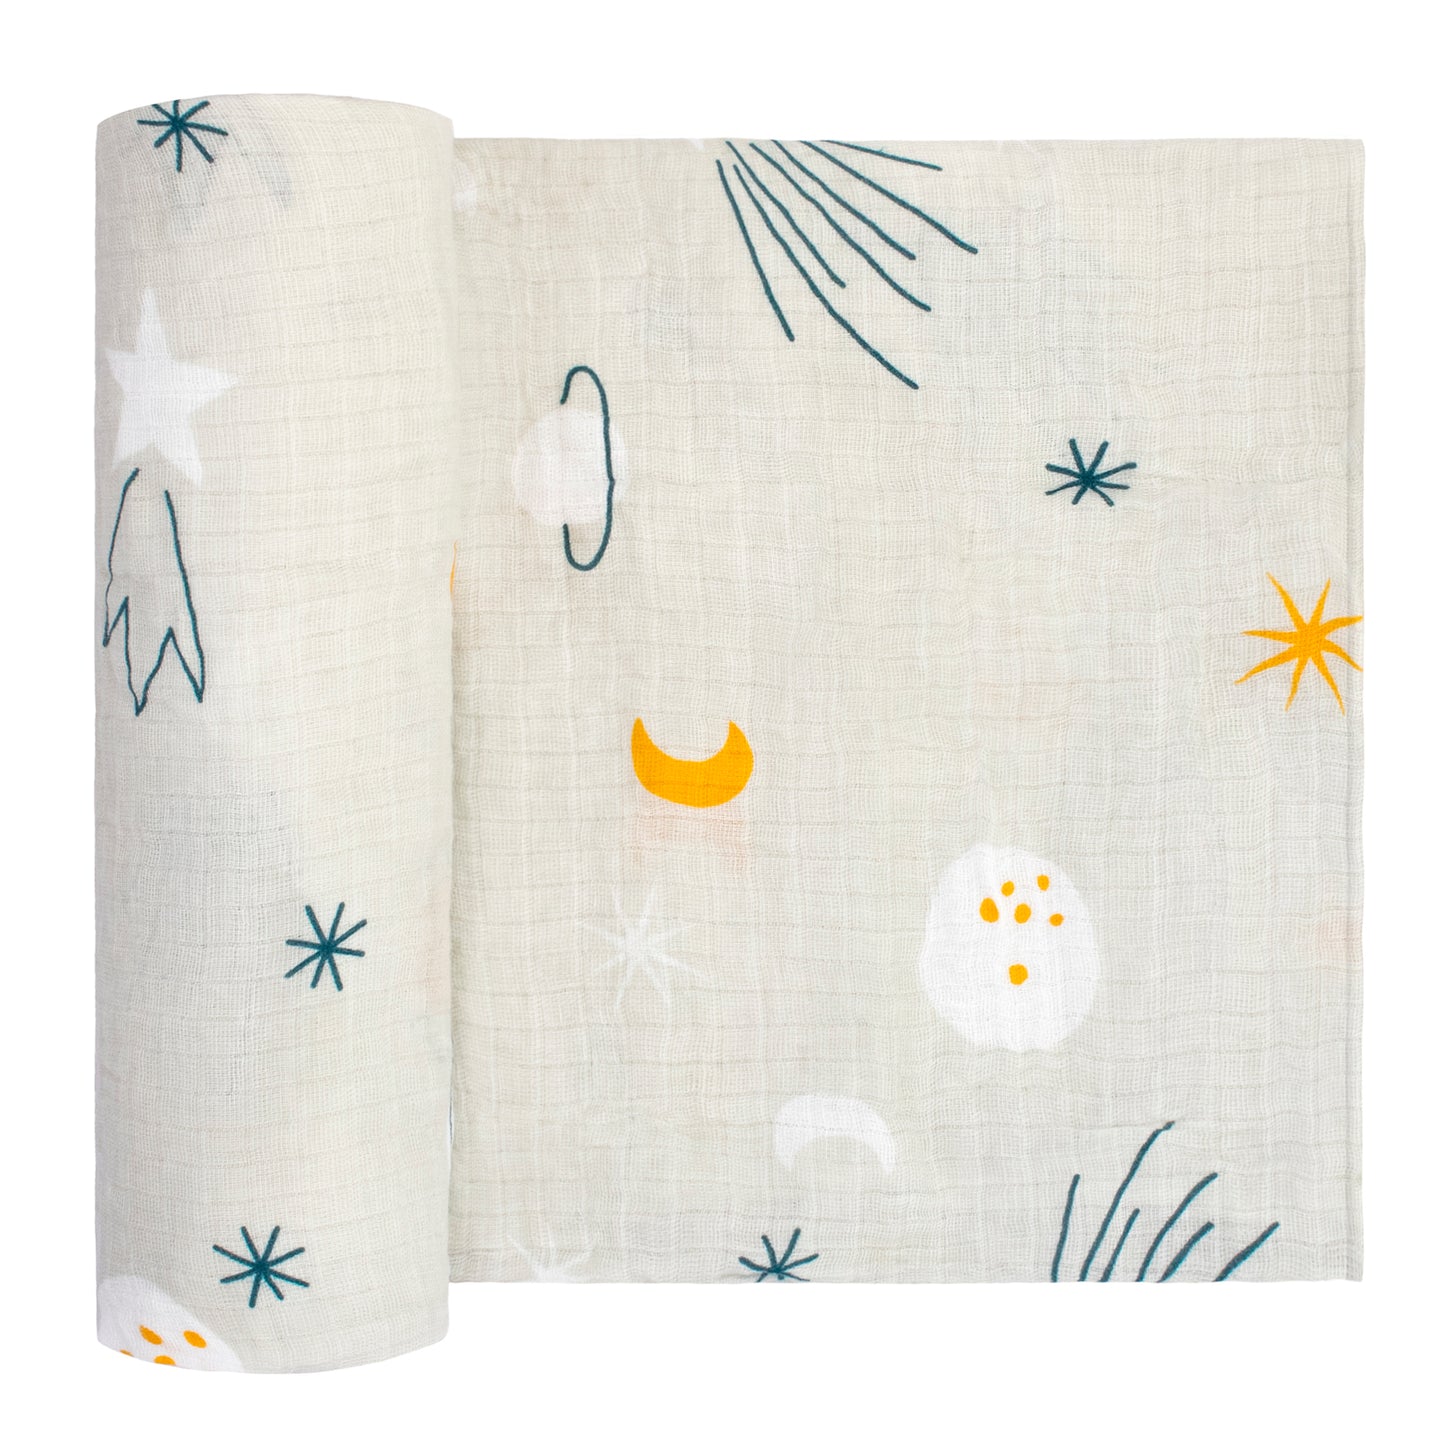 100% Cotton Luxury Muslin Swaddle Receiving Blanket for Boys and Gender Neutral, Blue, Light Gray Galaxy, Stars, Planets